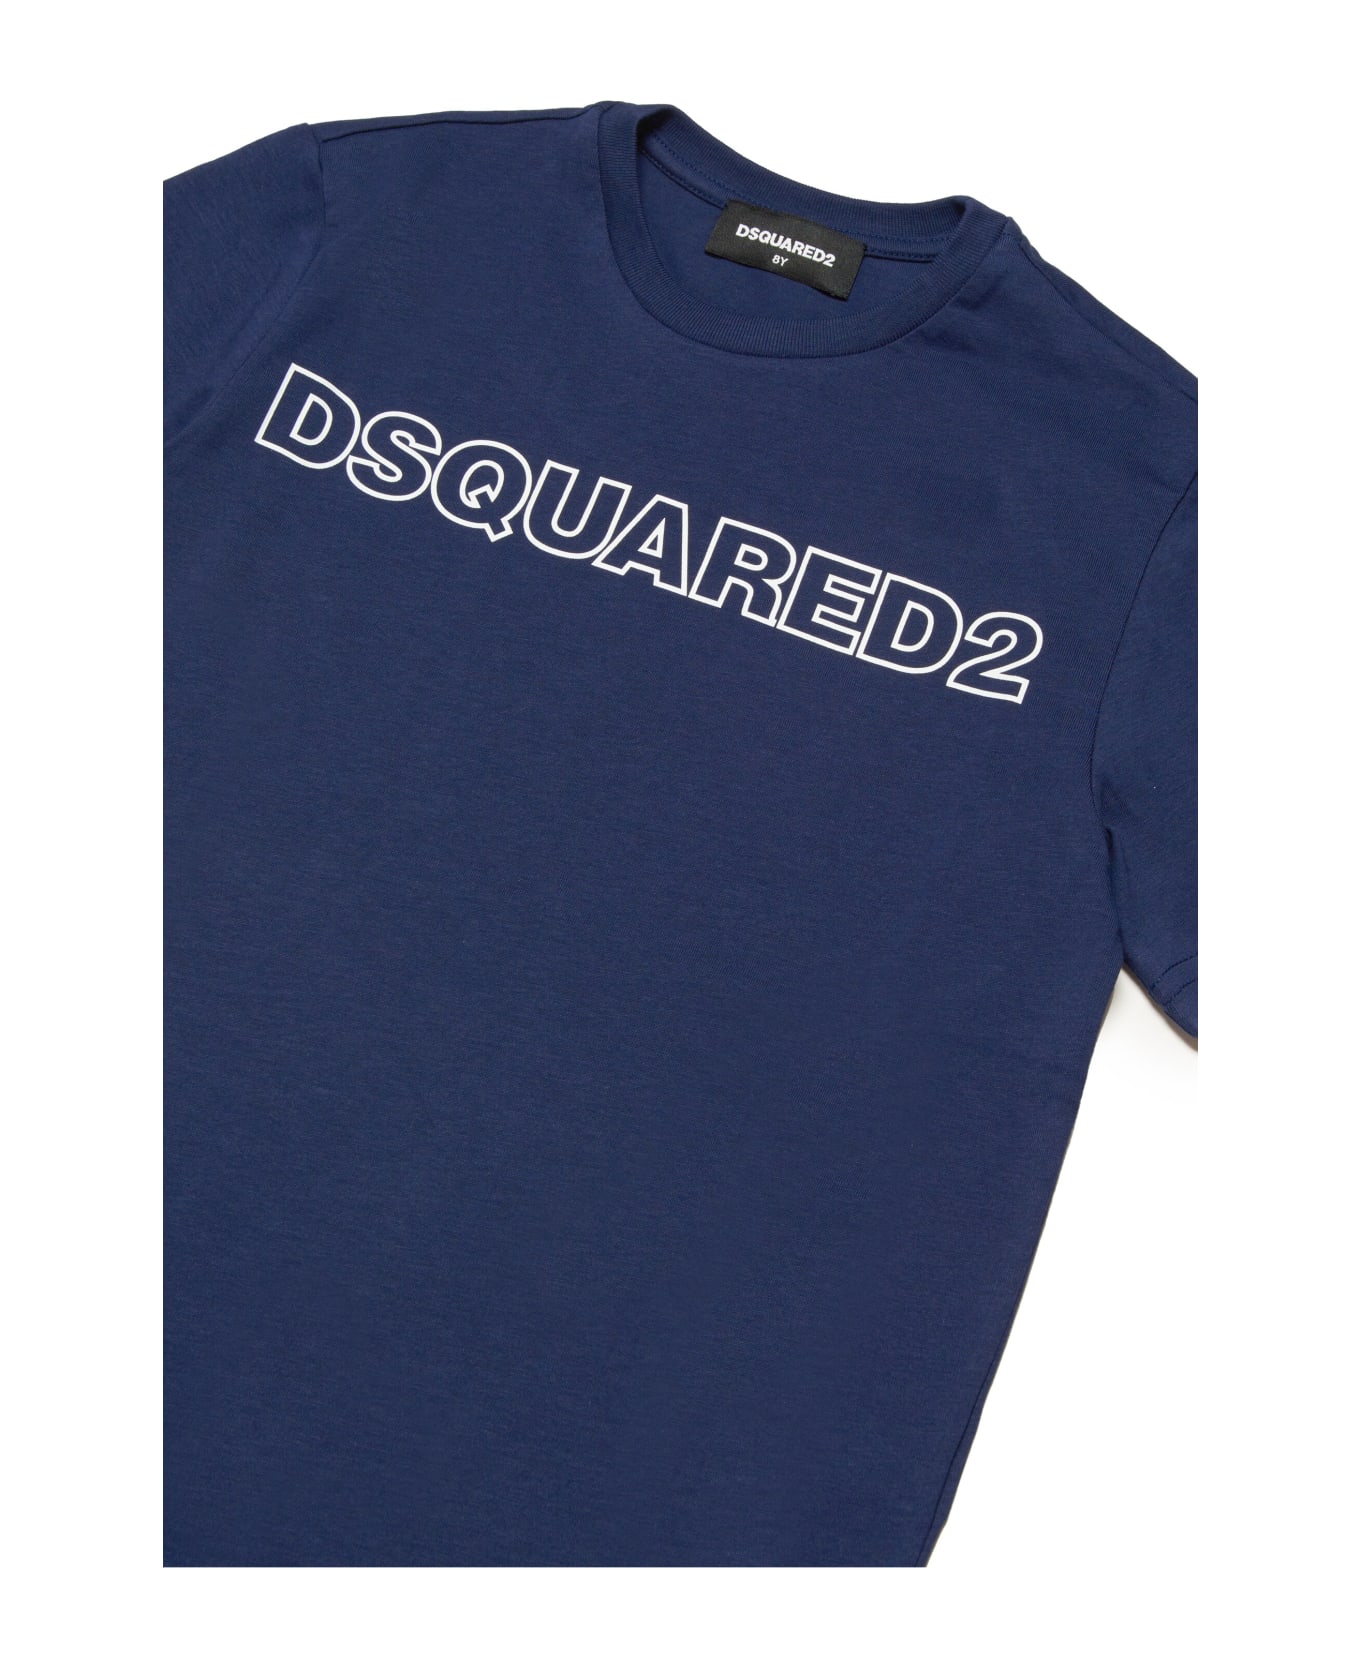 Dsquared2 D2t948u Relax T-shirt Dsquared Crew-neck, Short-sleeved, Cotton Jersey T-shirt. Fit: Relaxed Fit, Regular. The Garment Features 's Contrastin - Blu